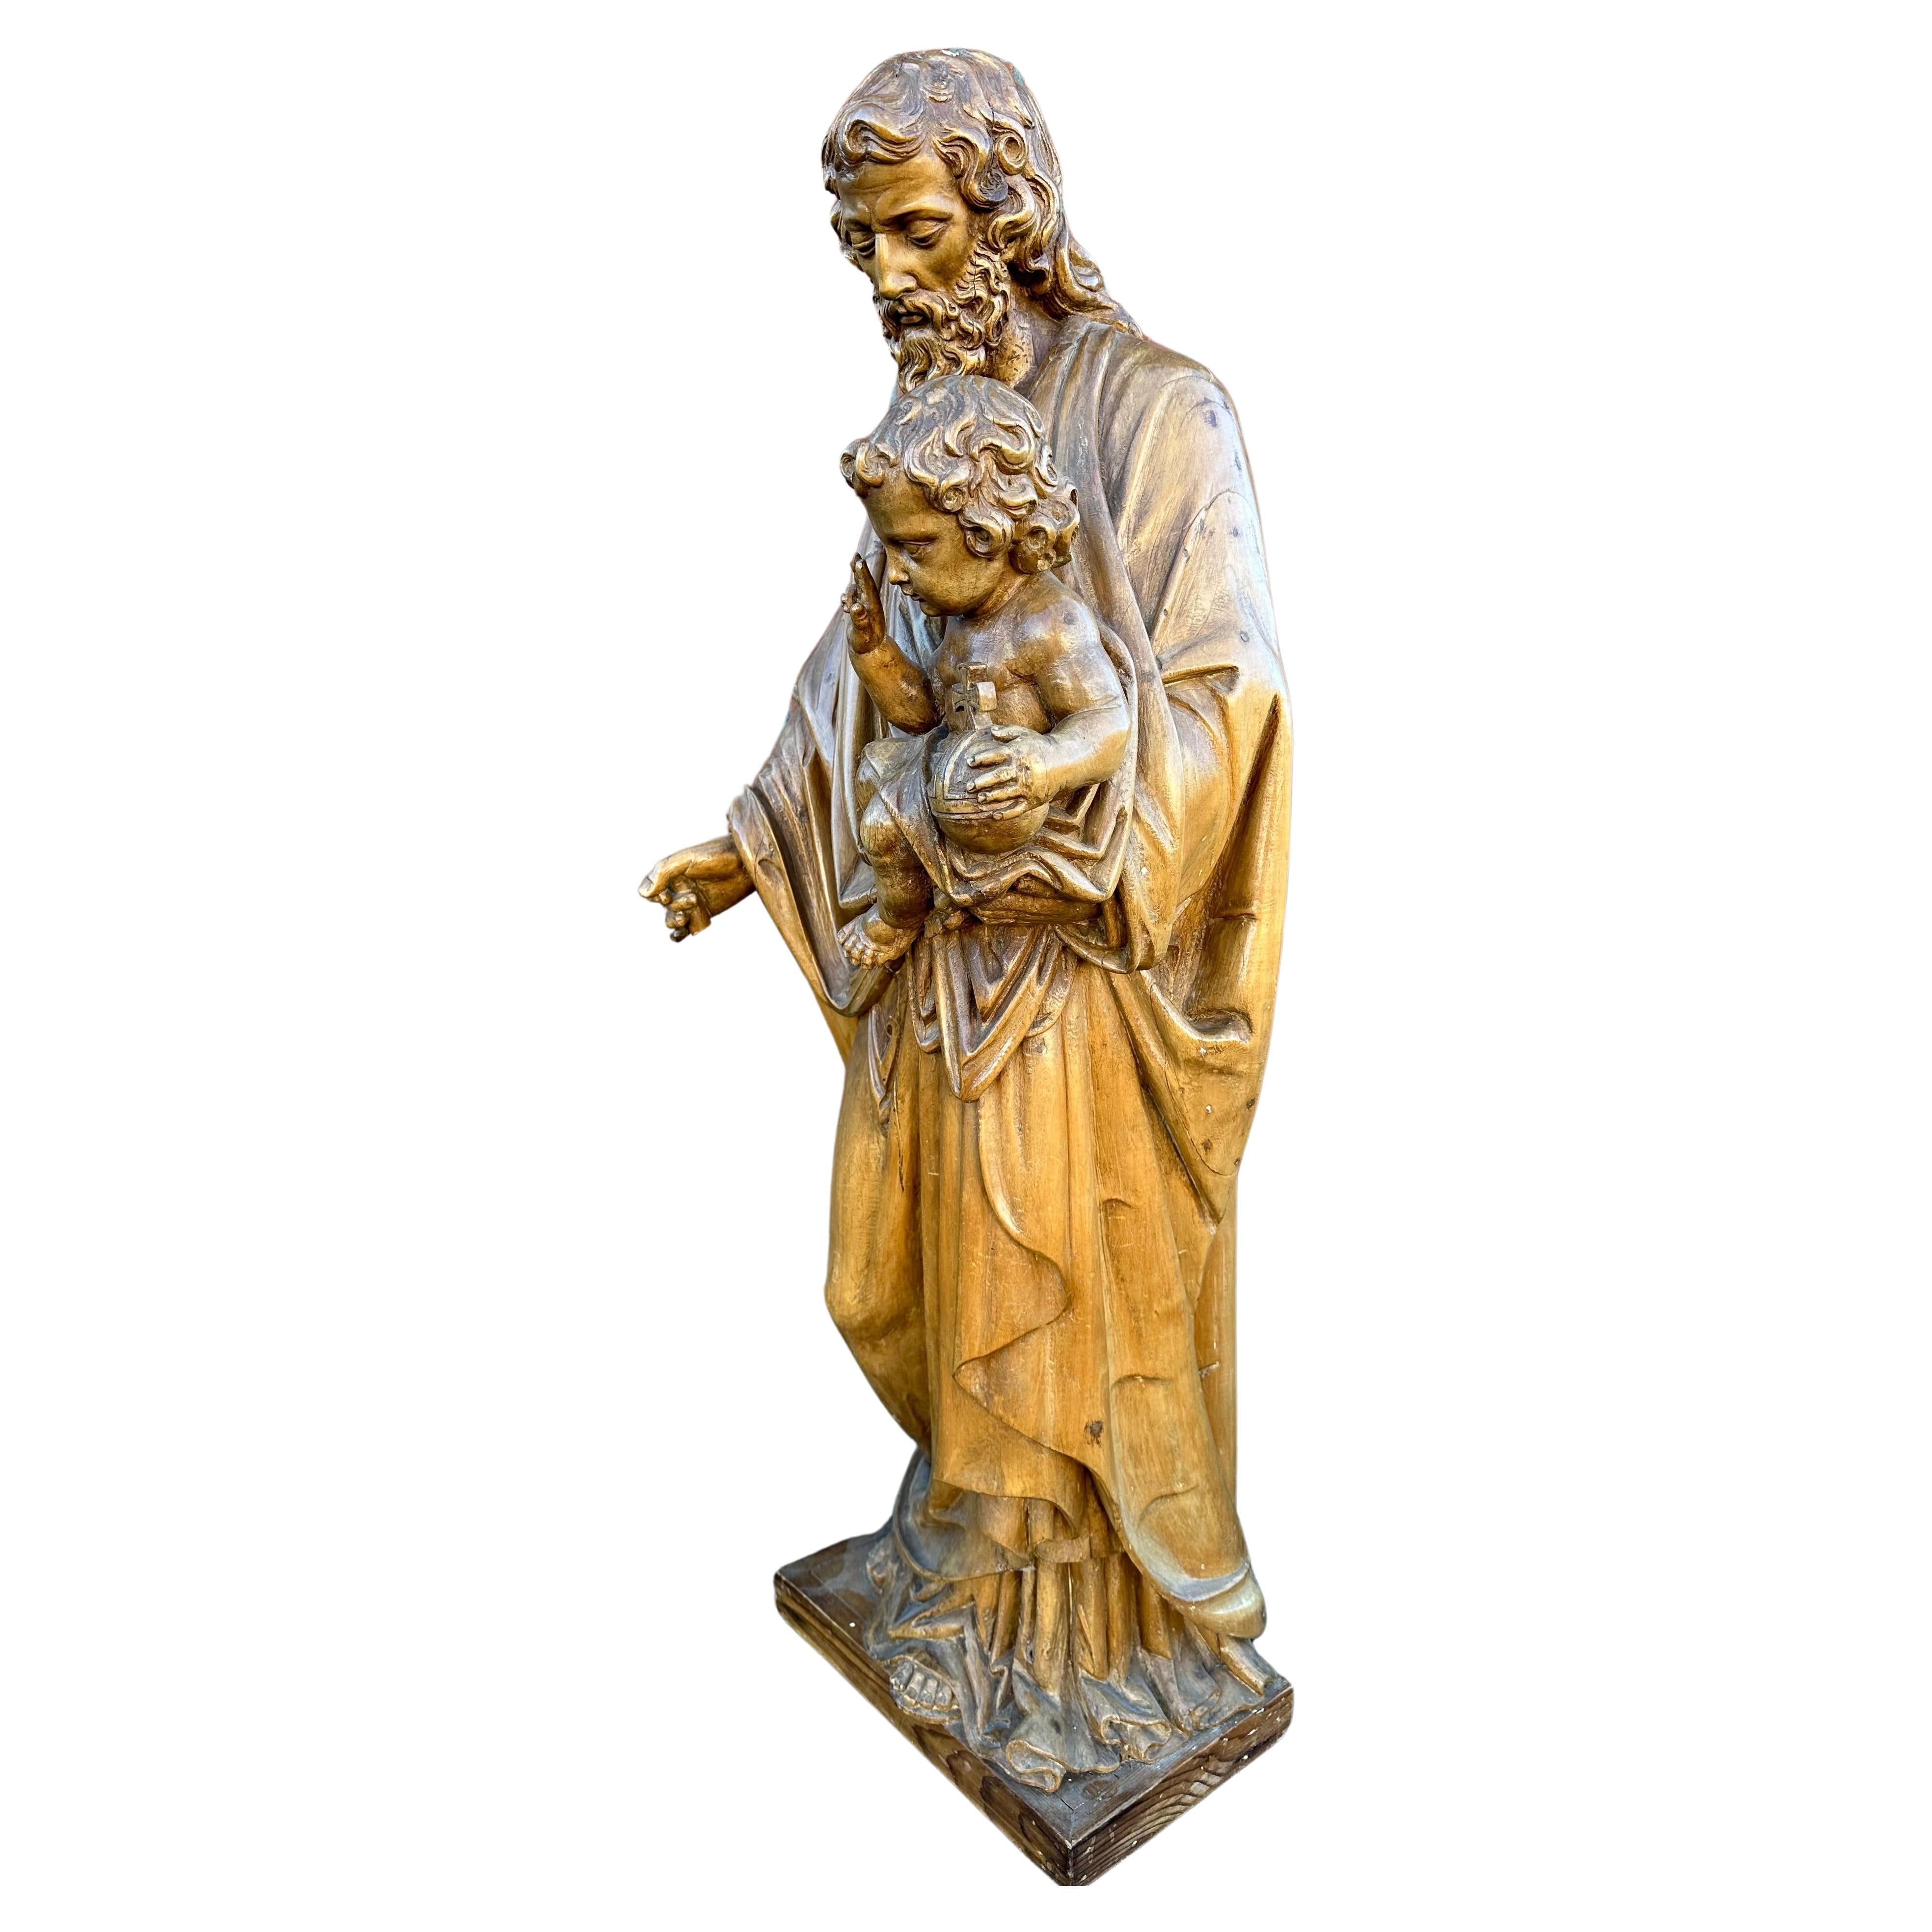 Large and high quality carved antique sculpture of Joseph holding the child Jesus.

If you are looking for a great value for money, work of religious art then this quality carved church relic could be gracing your home or monastery or house of